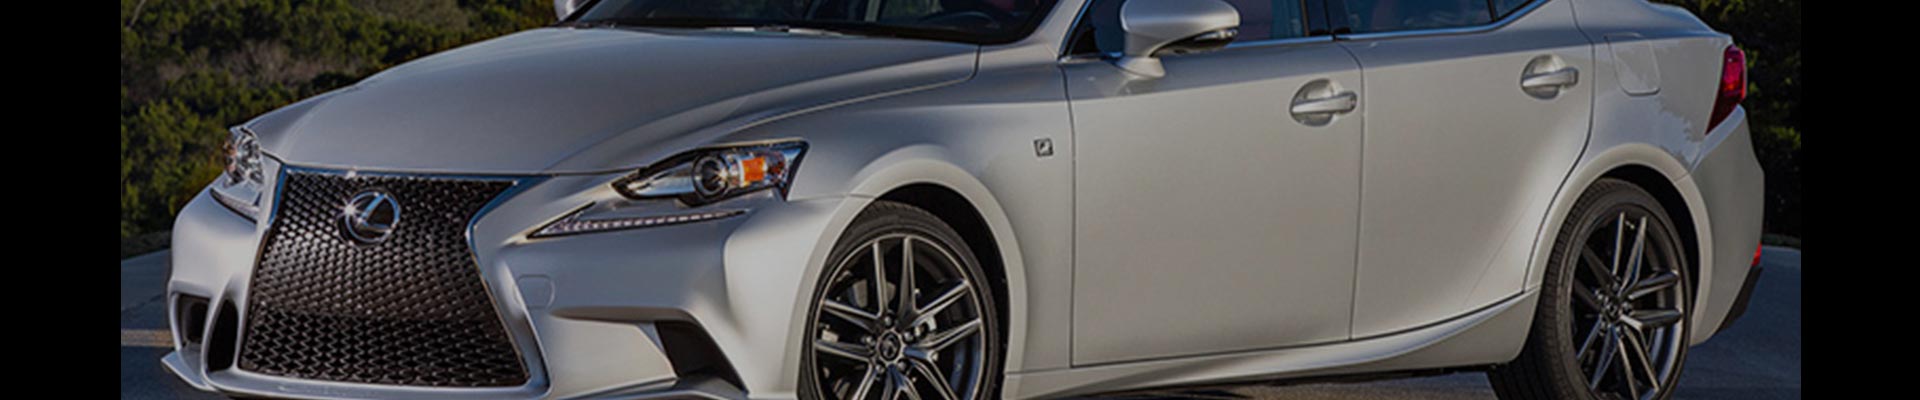 Shop Replacement and OEM 2019 Lexus IS350 Parts with Discounted Price on the Net